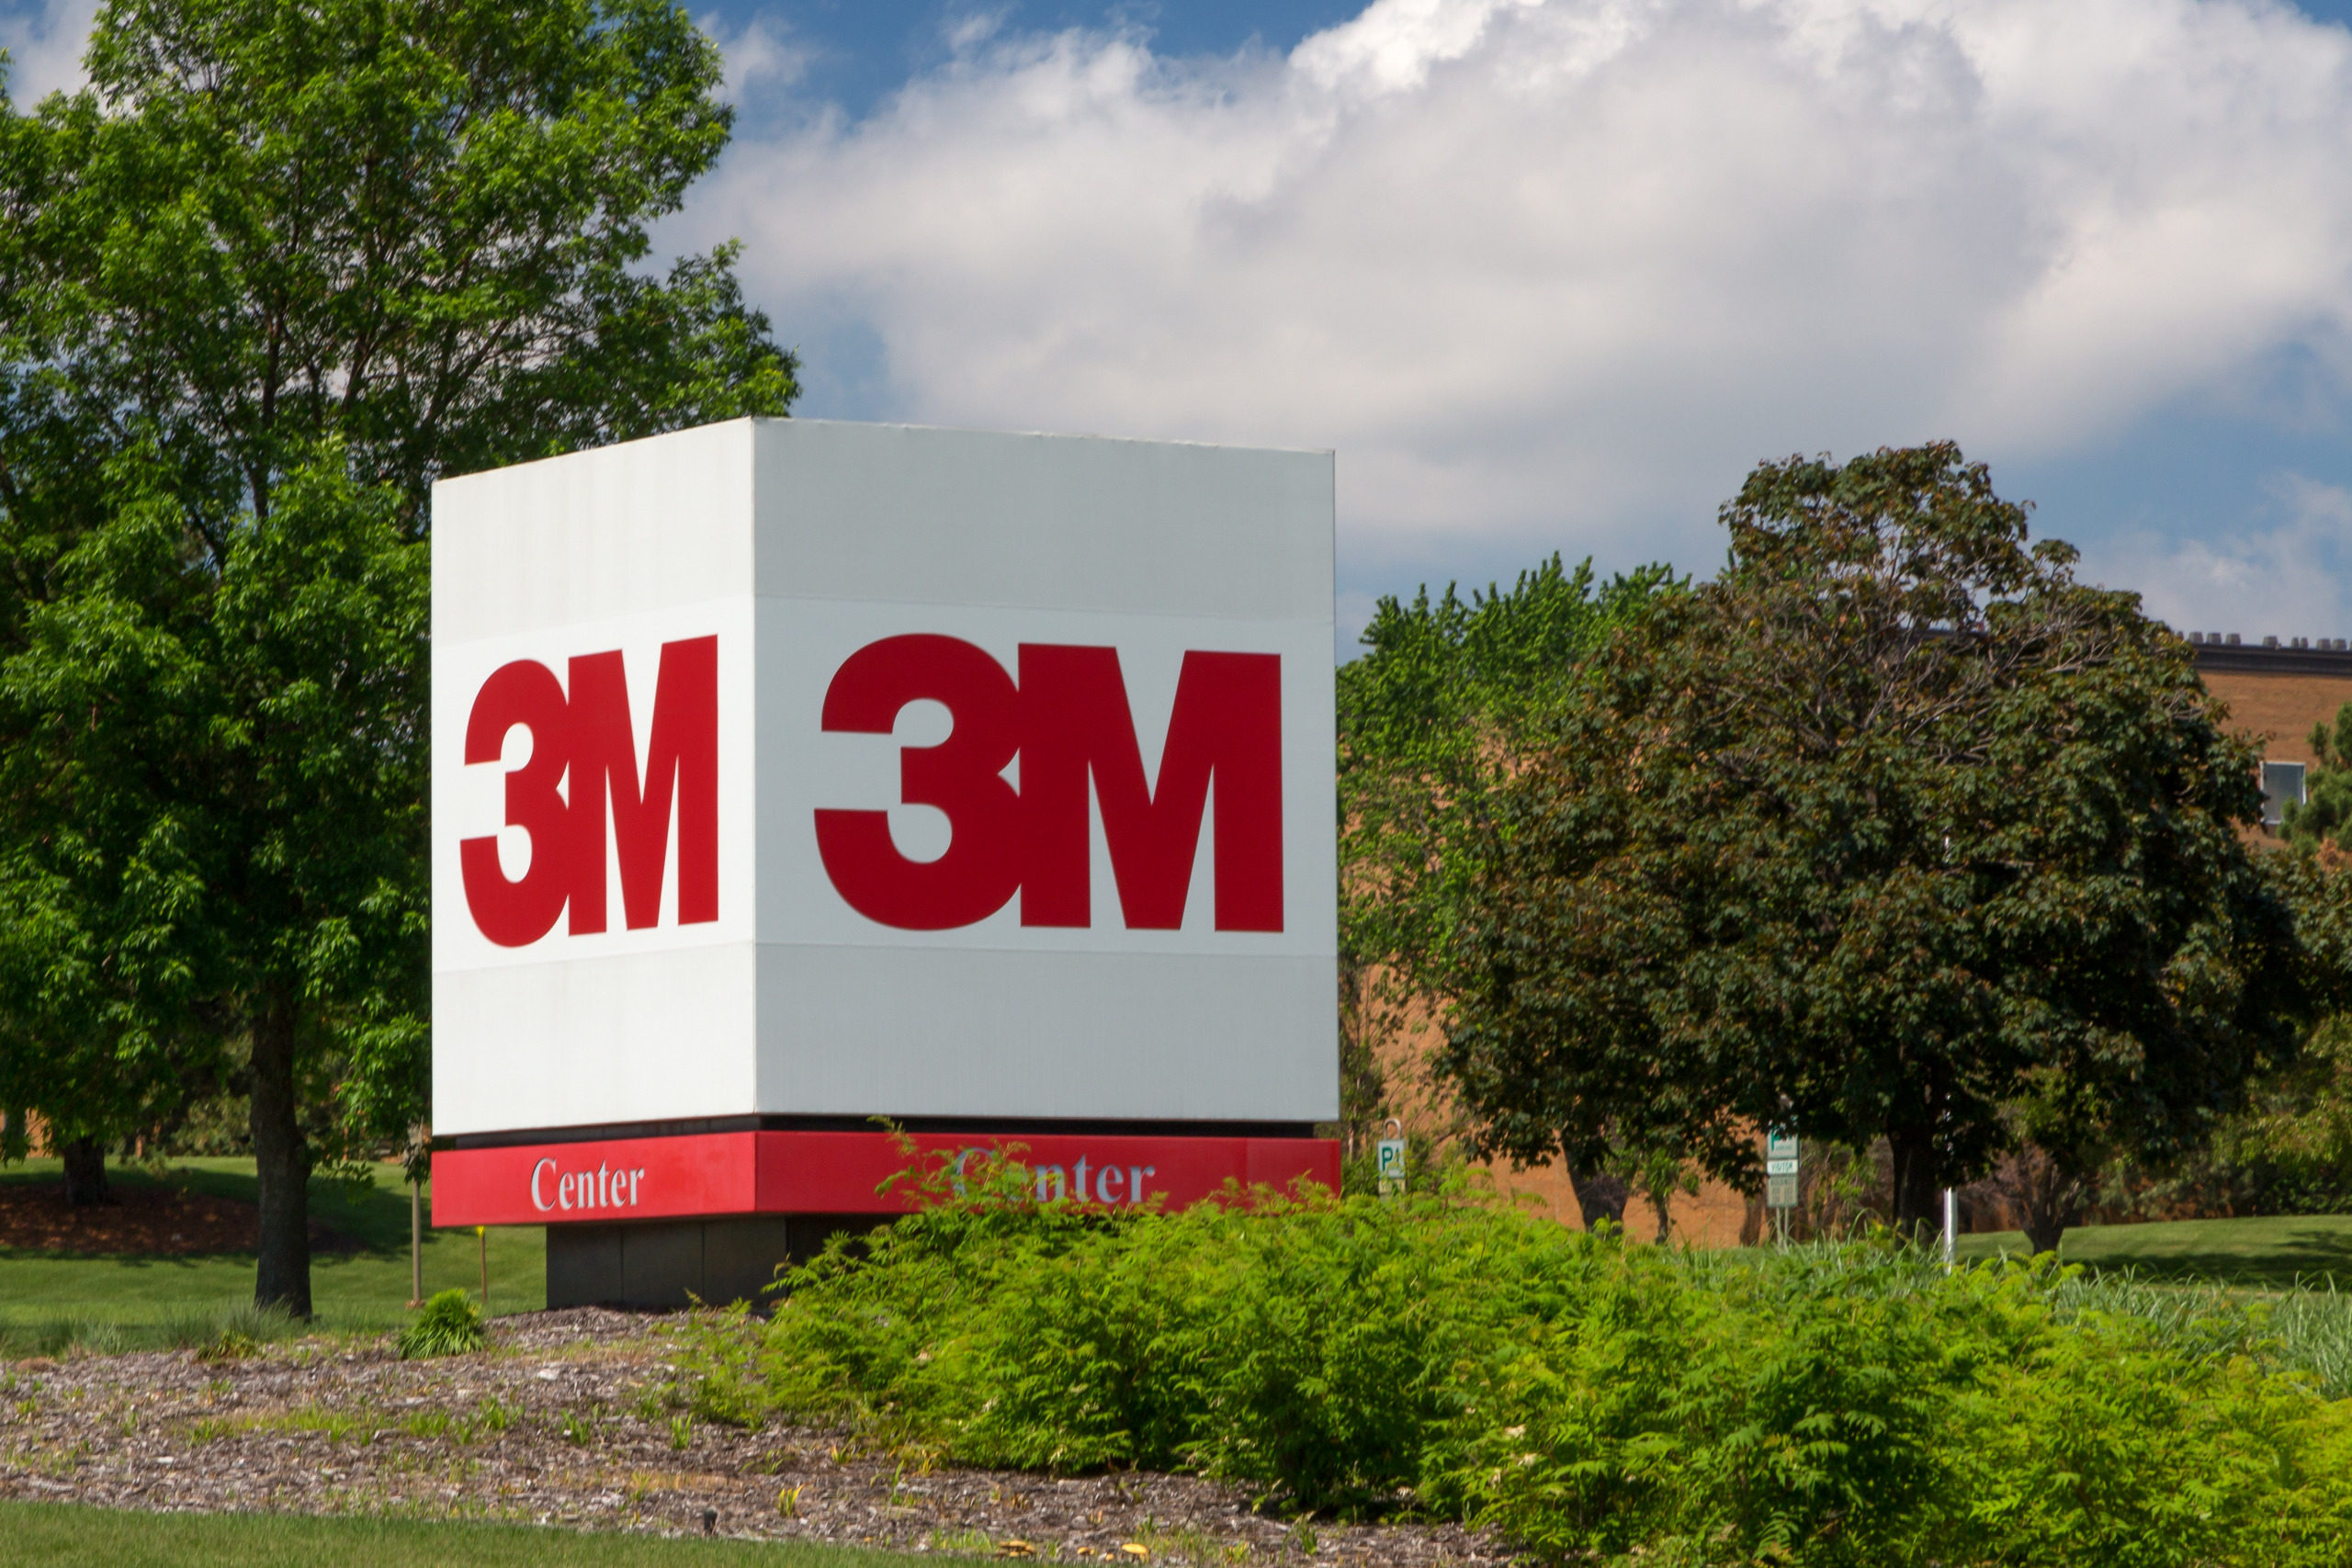 Spurred by regulators, 3M to phase out ‘forever chemicals’ – Indianapolis Business Journal